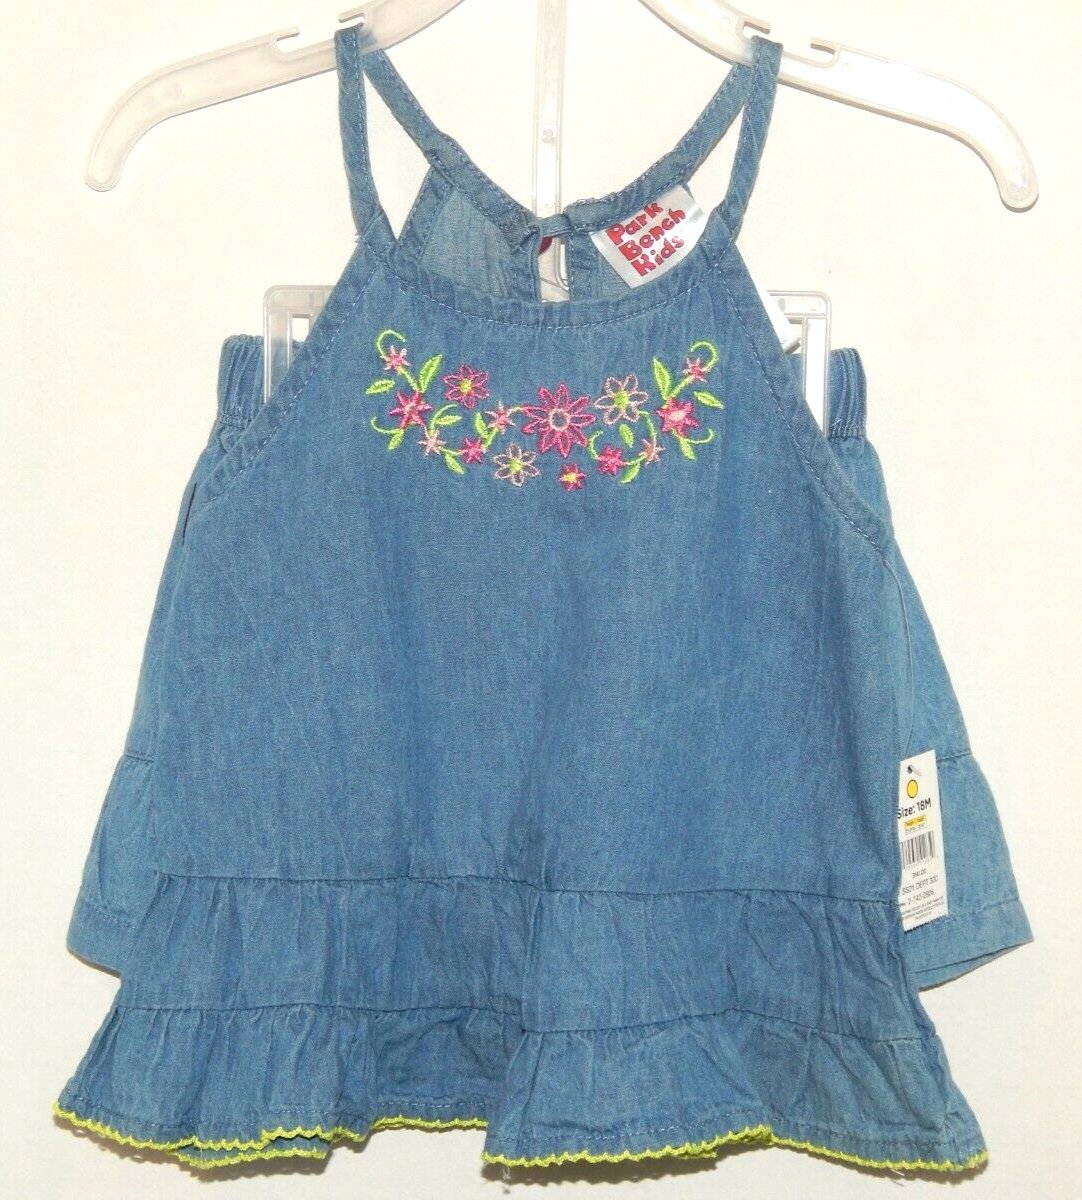 New PARK BENCH KIDS 2pc Outfit Girls 12months Embroidered Top + Pullup Shorts Park Bench Kids